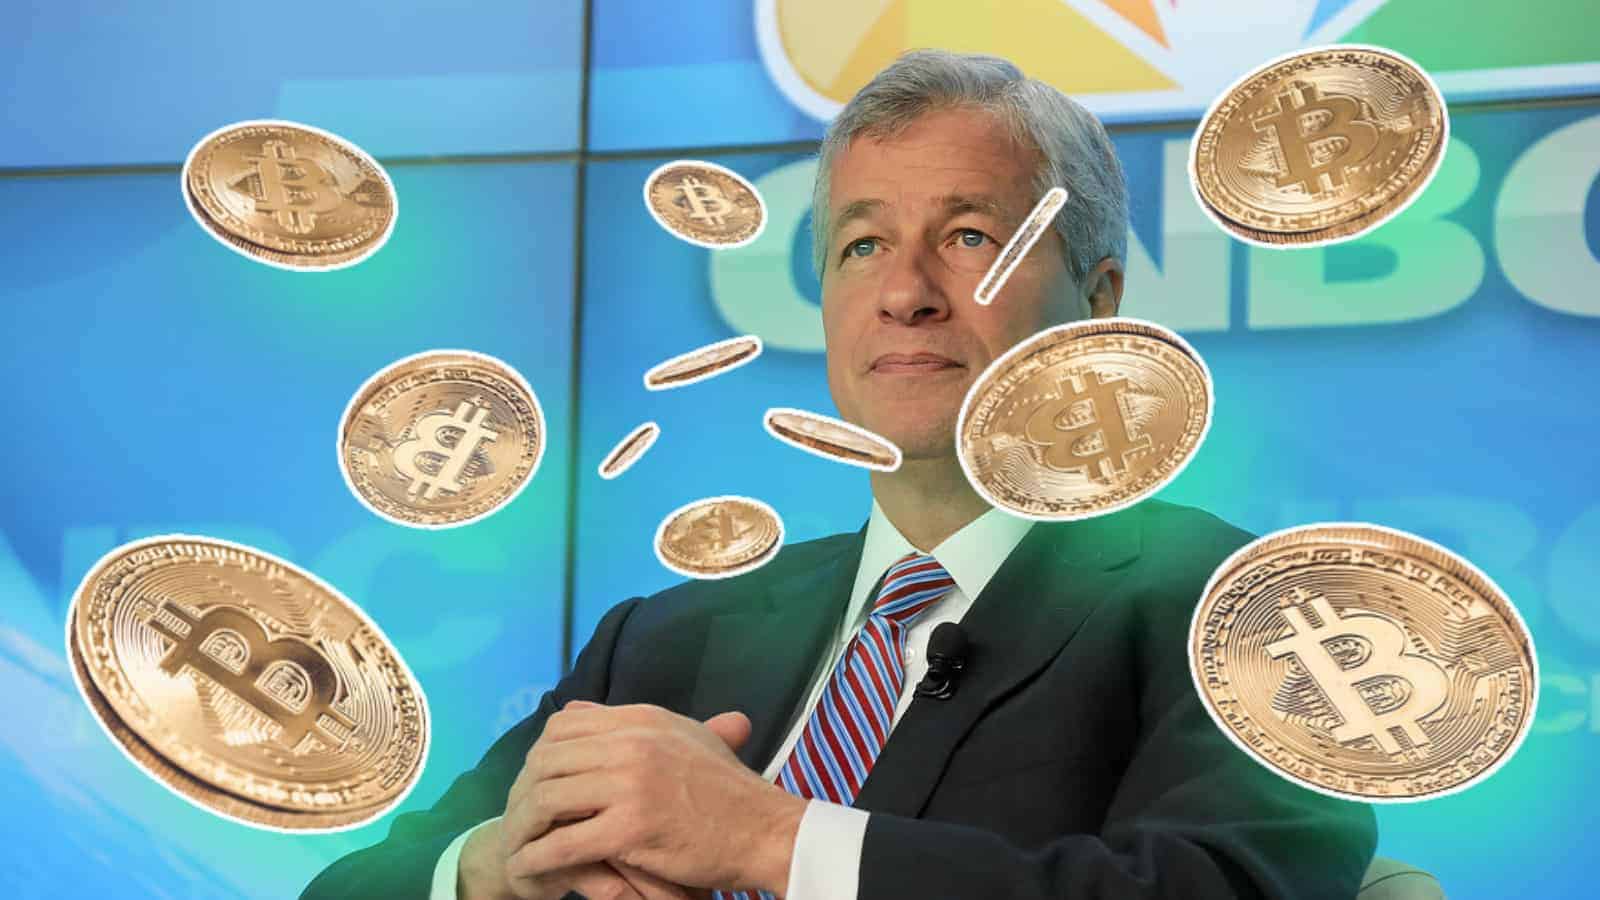 JP Morgan CEO Jamie Dimon Says, “I Don’t Really Give a Sh*t” about Bitcoin